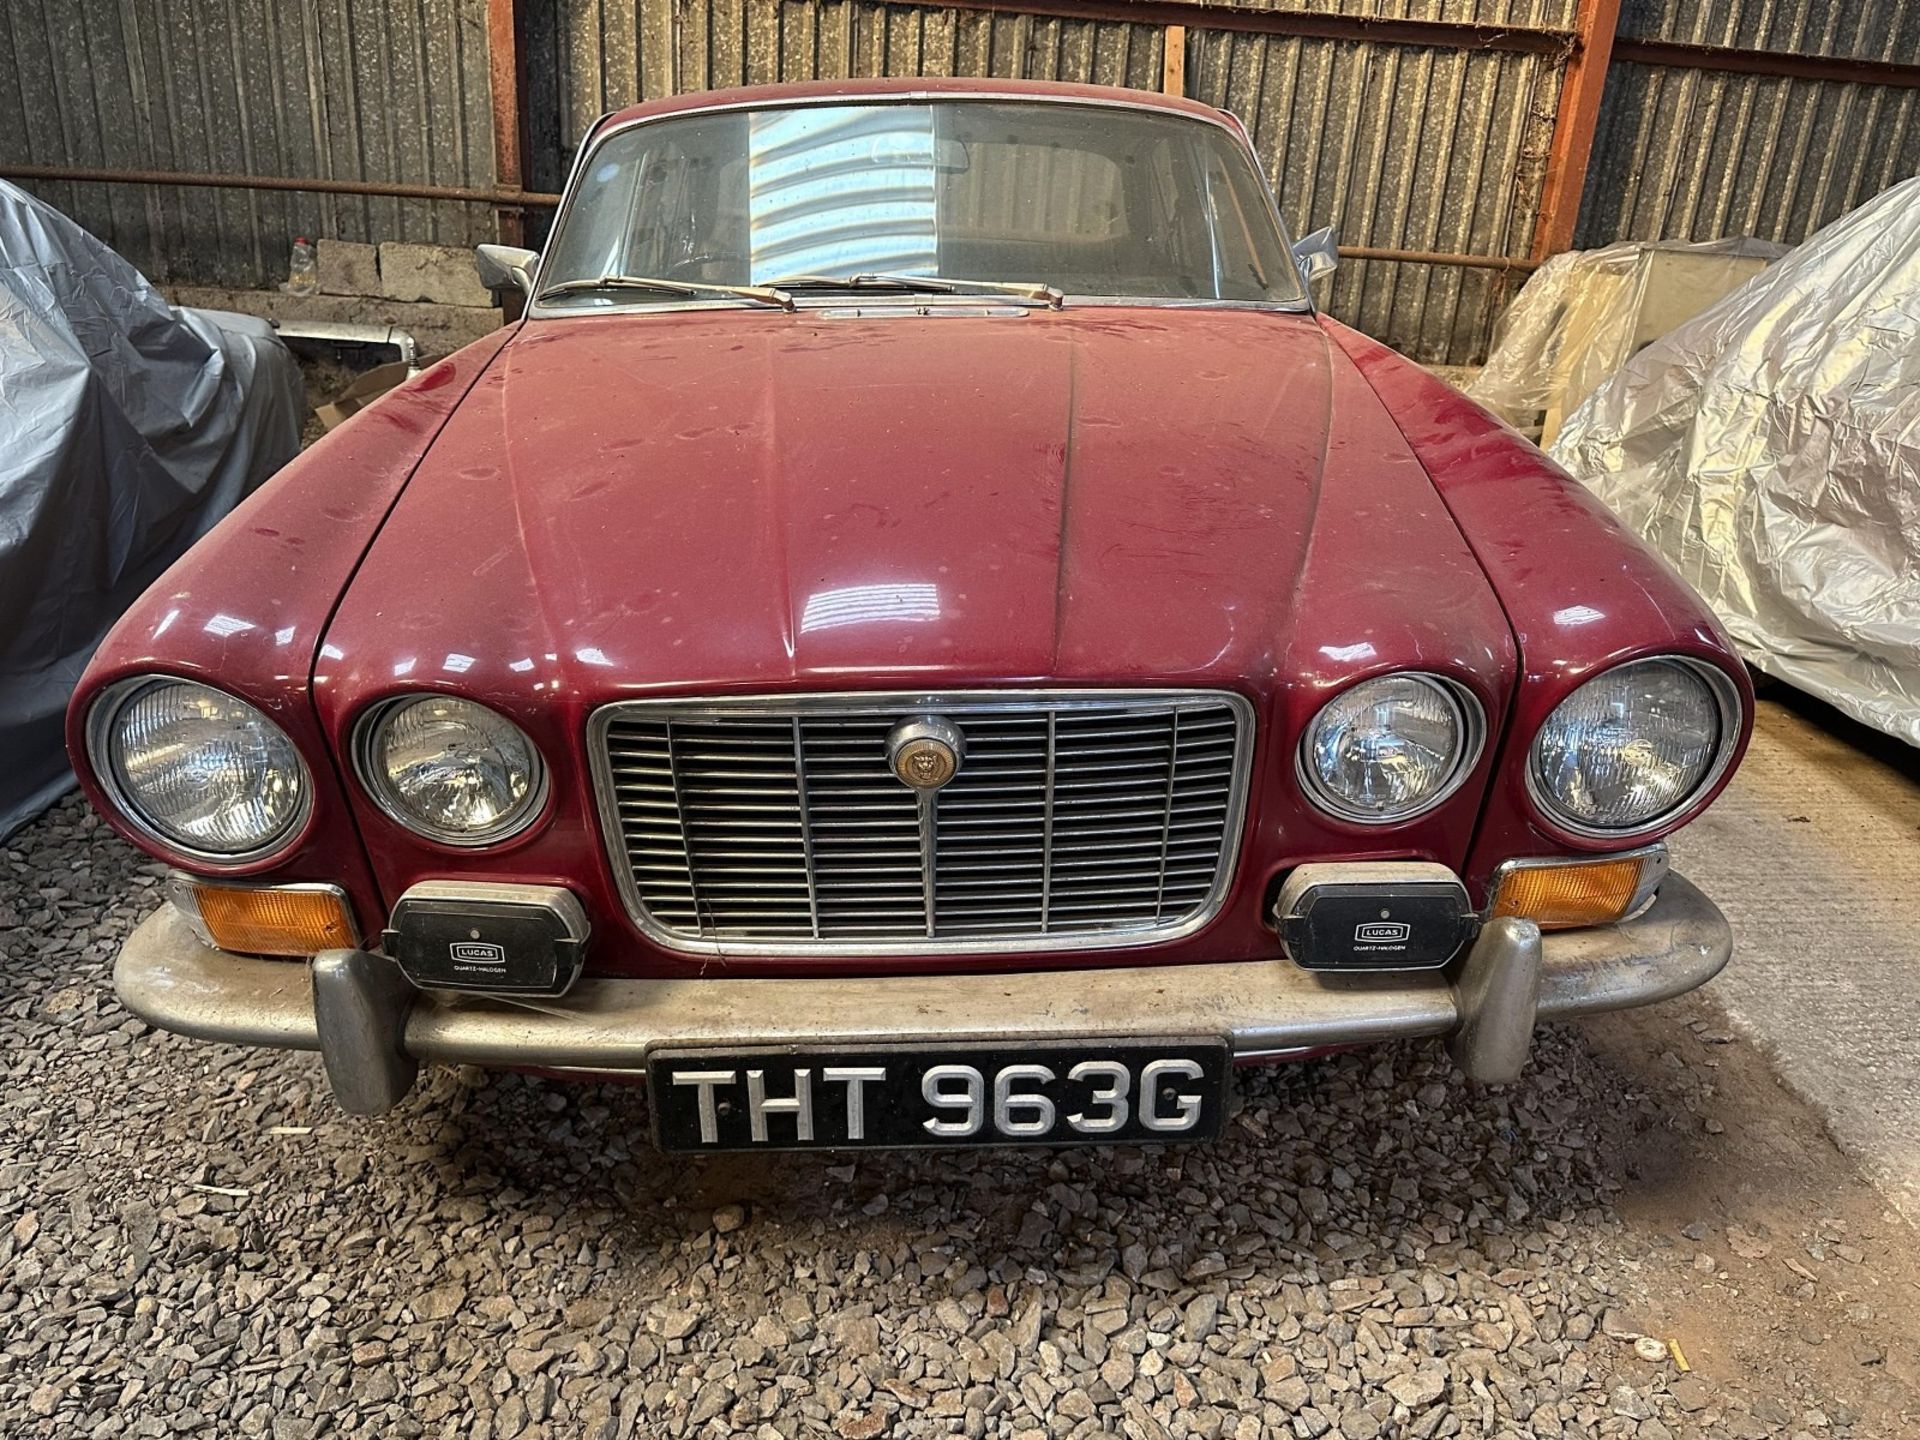 1969 Jaguar XJ6 4.2 Being sold without reserve Registration number THT 963G Red with a mushroom - Image 3 of 73